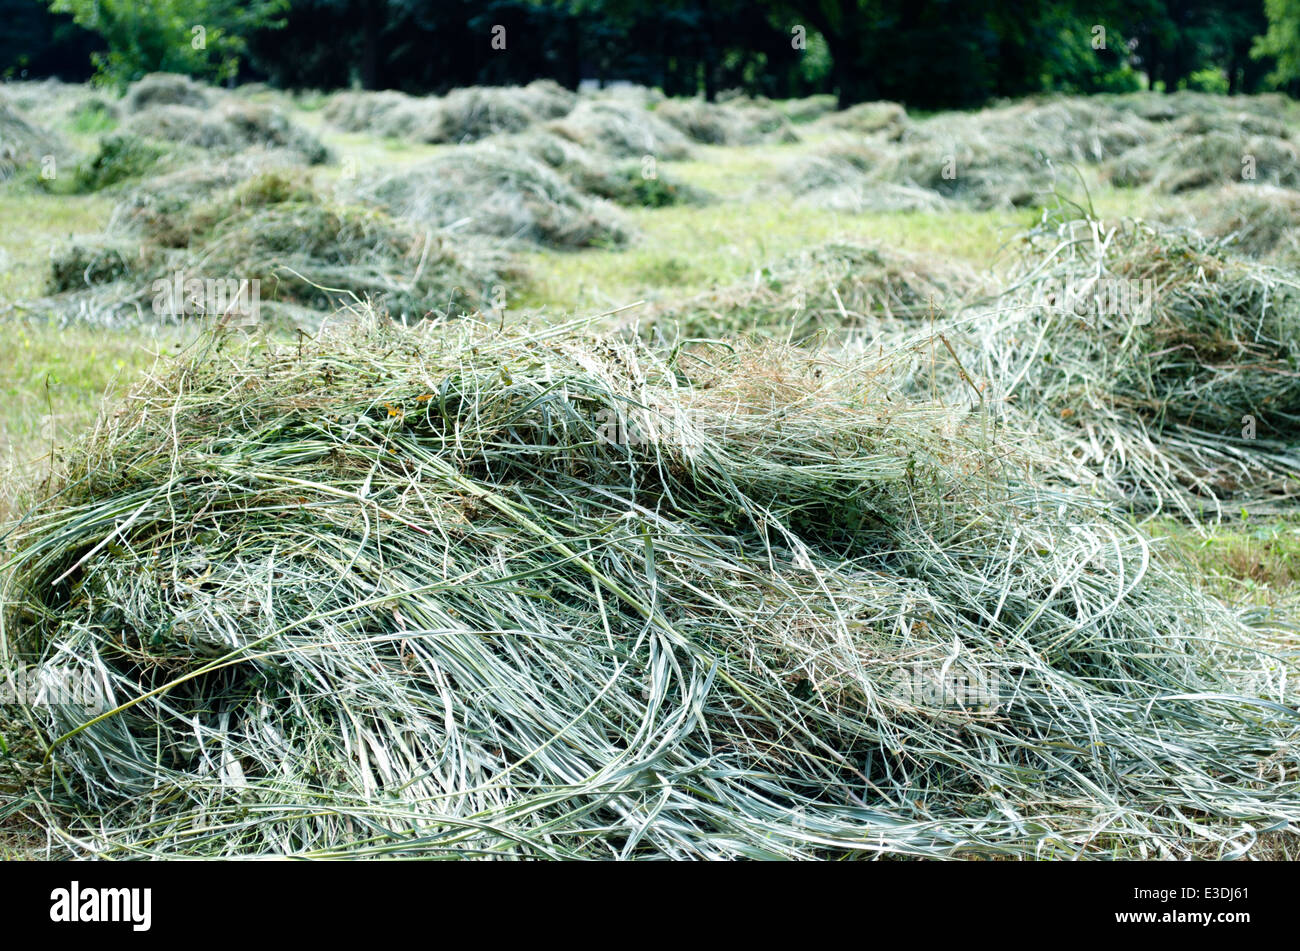 Cutting edge from cut and uncut grass in rousse Stock Photo